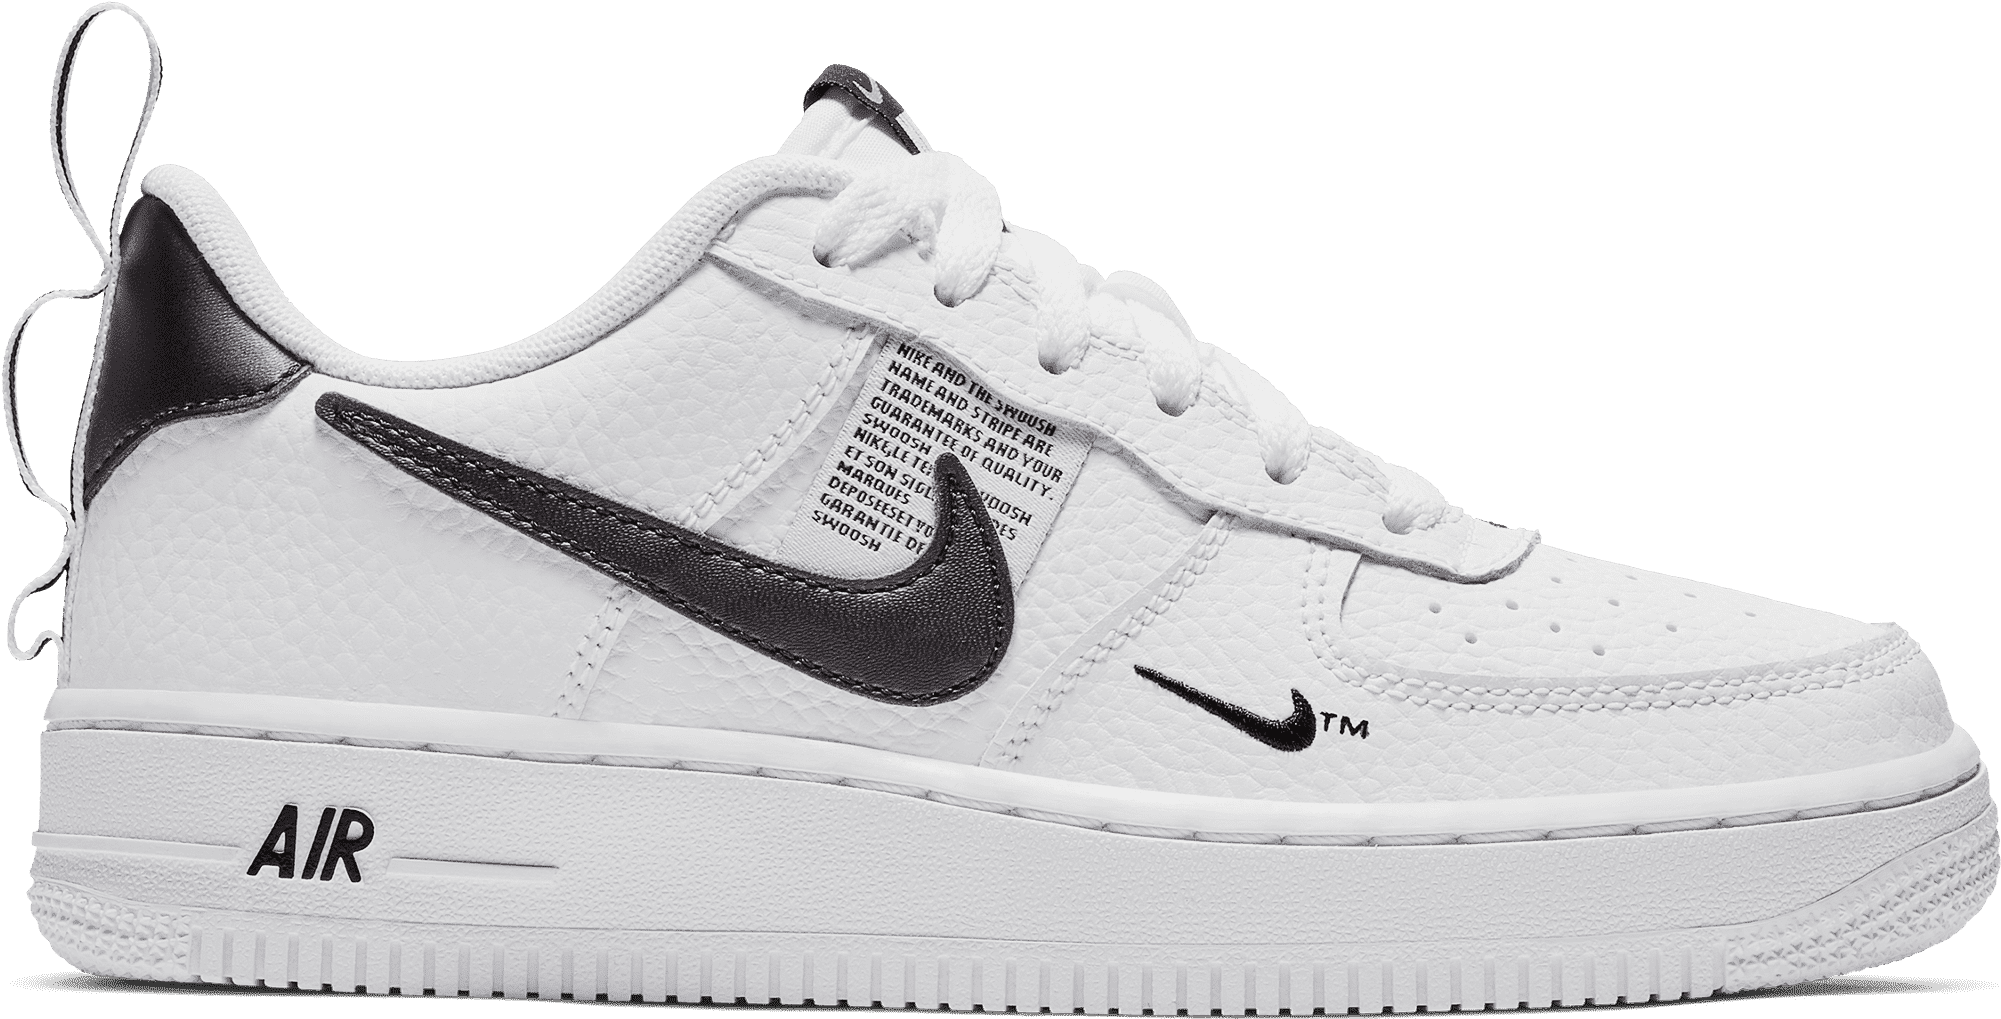 Air Force One White Nike Shoes PNG Transparent Image